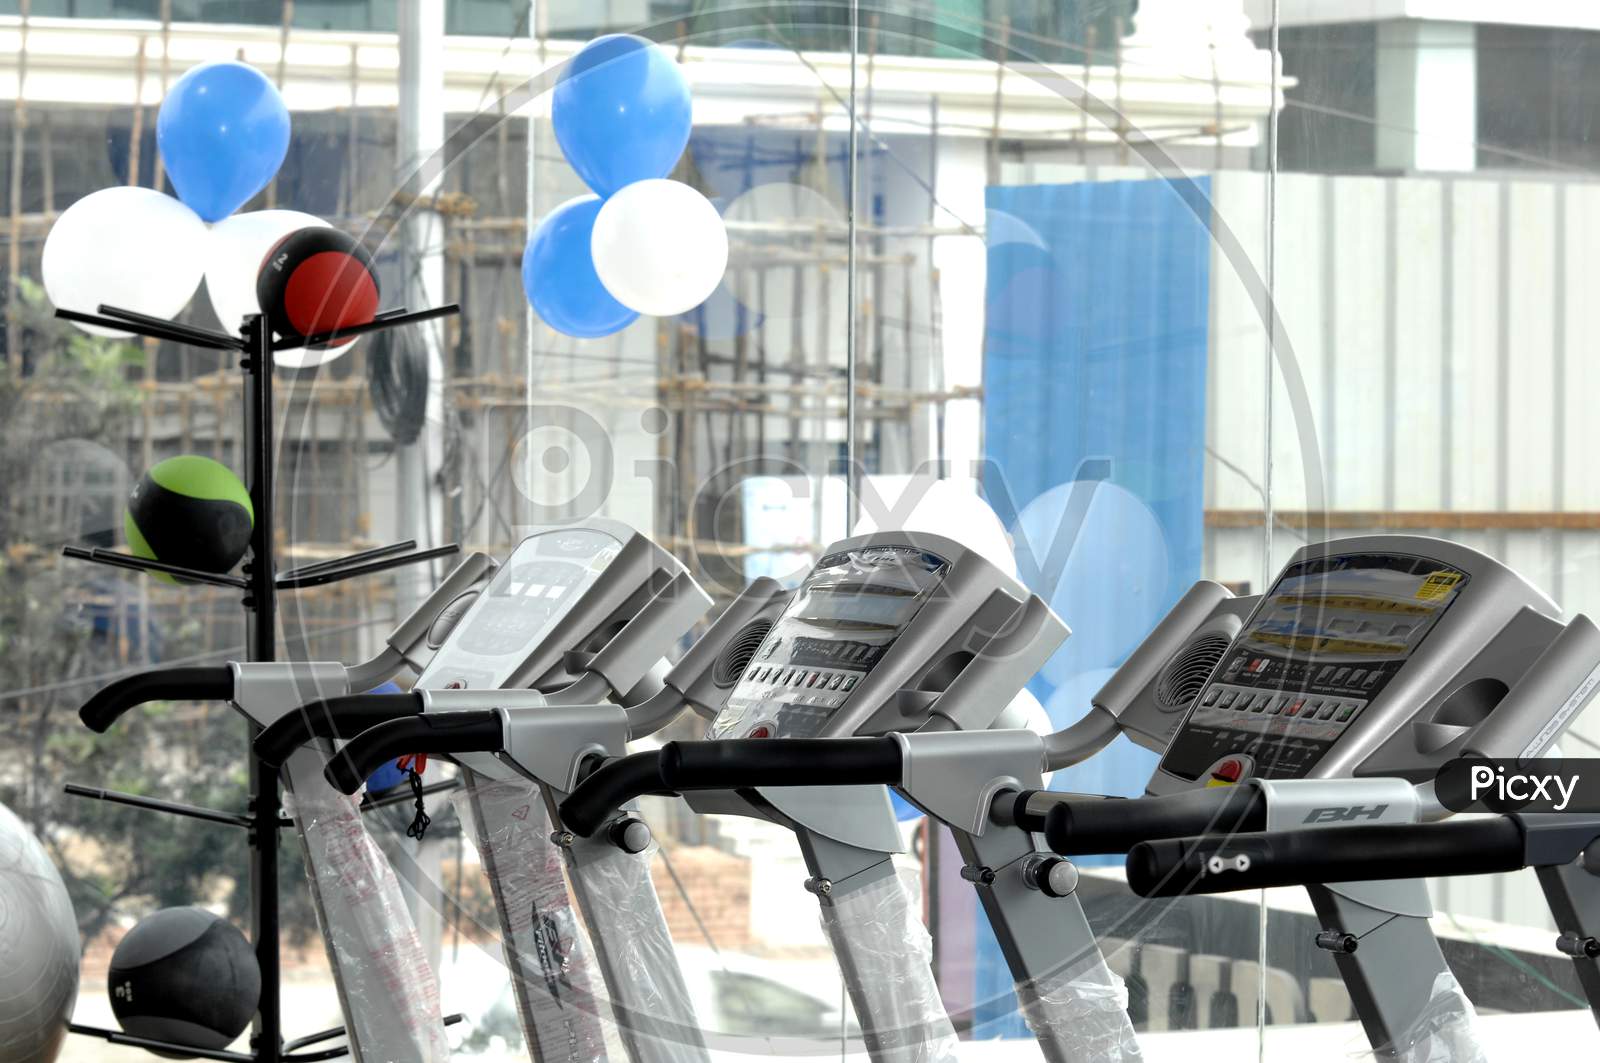 Top section view of treadmills in a gym